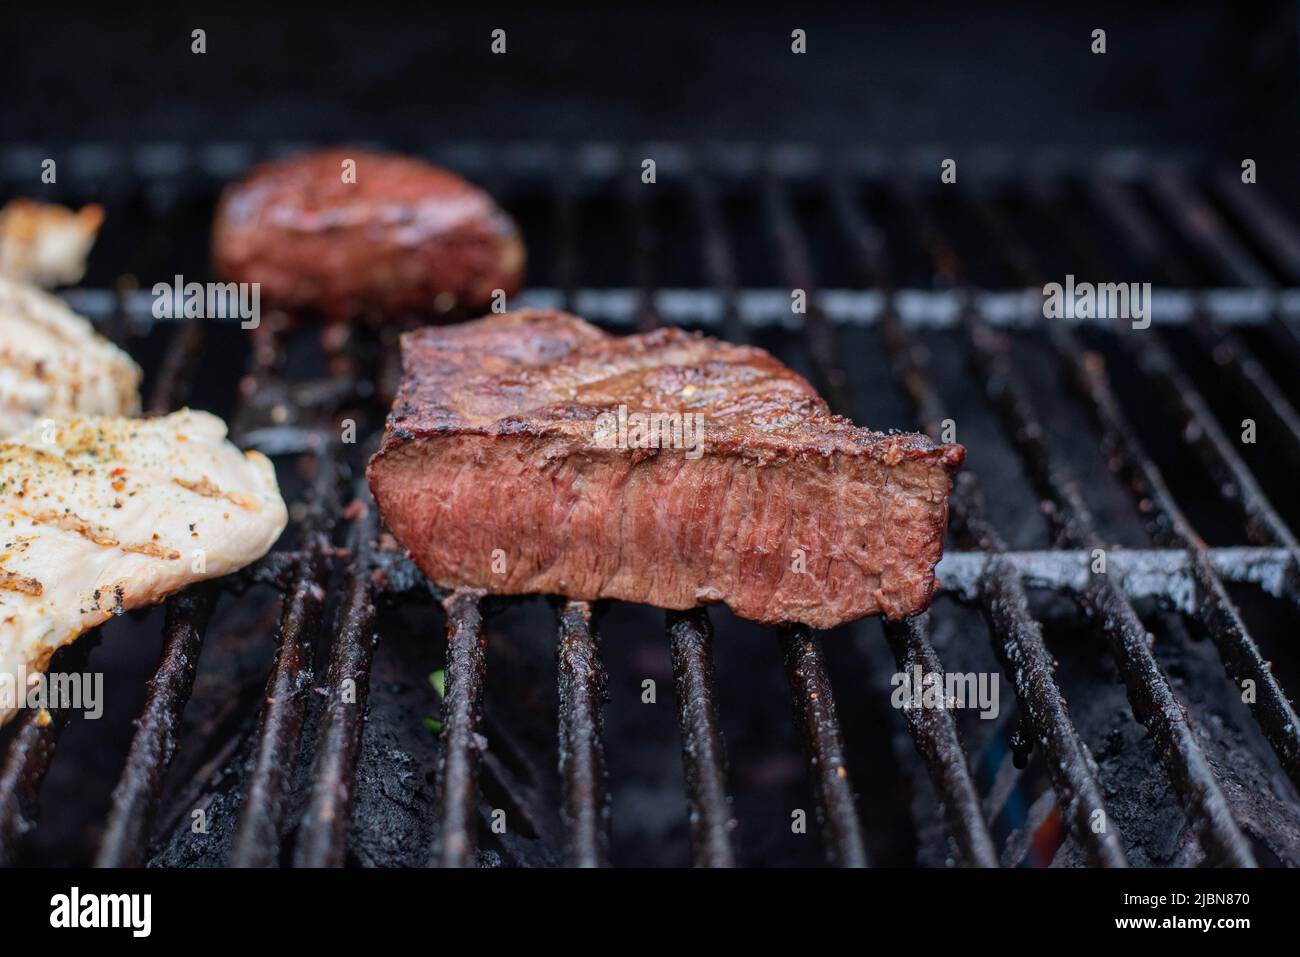 Steaks cooking on a grill. Stock Photo